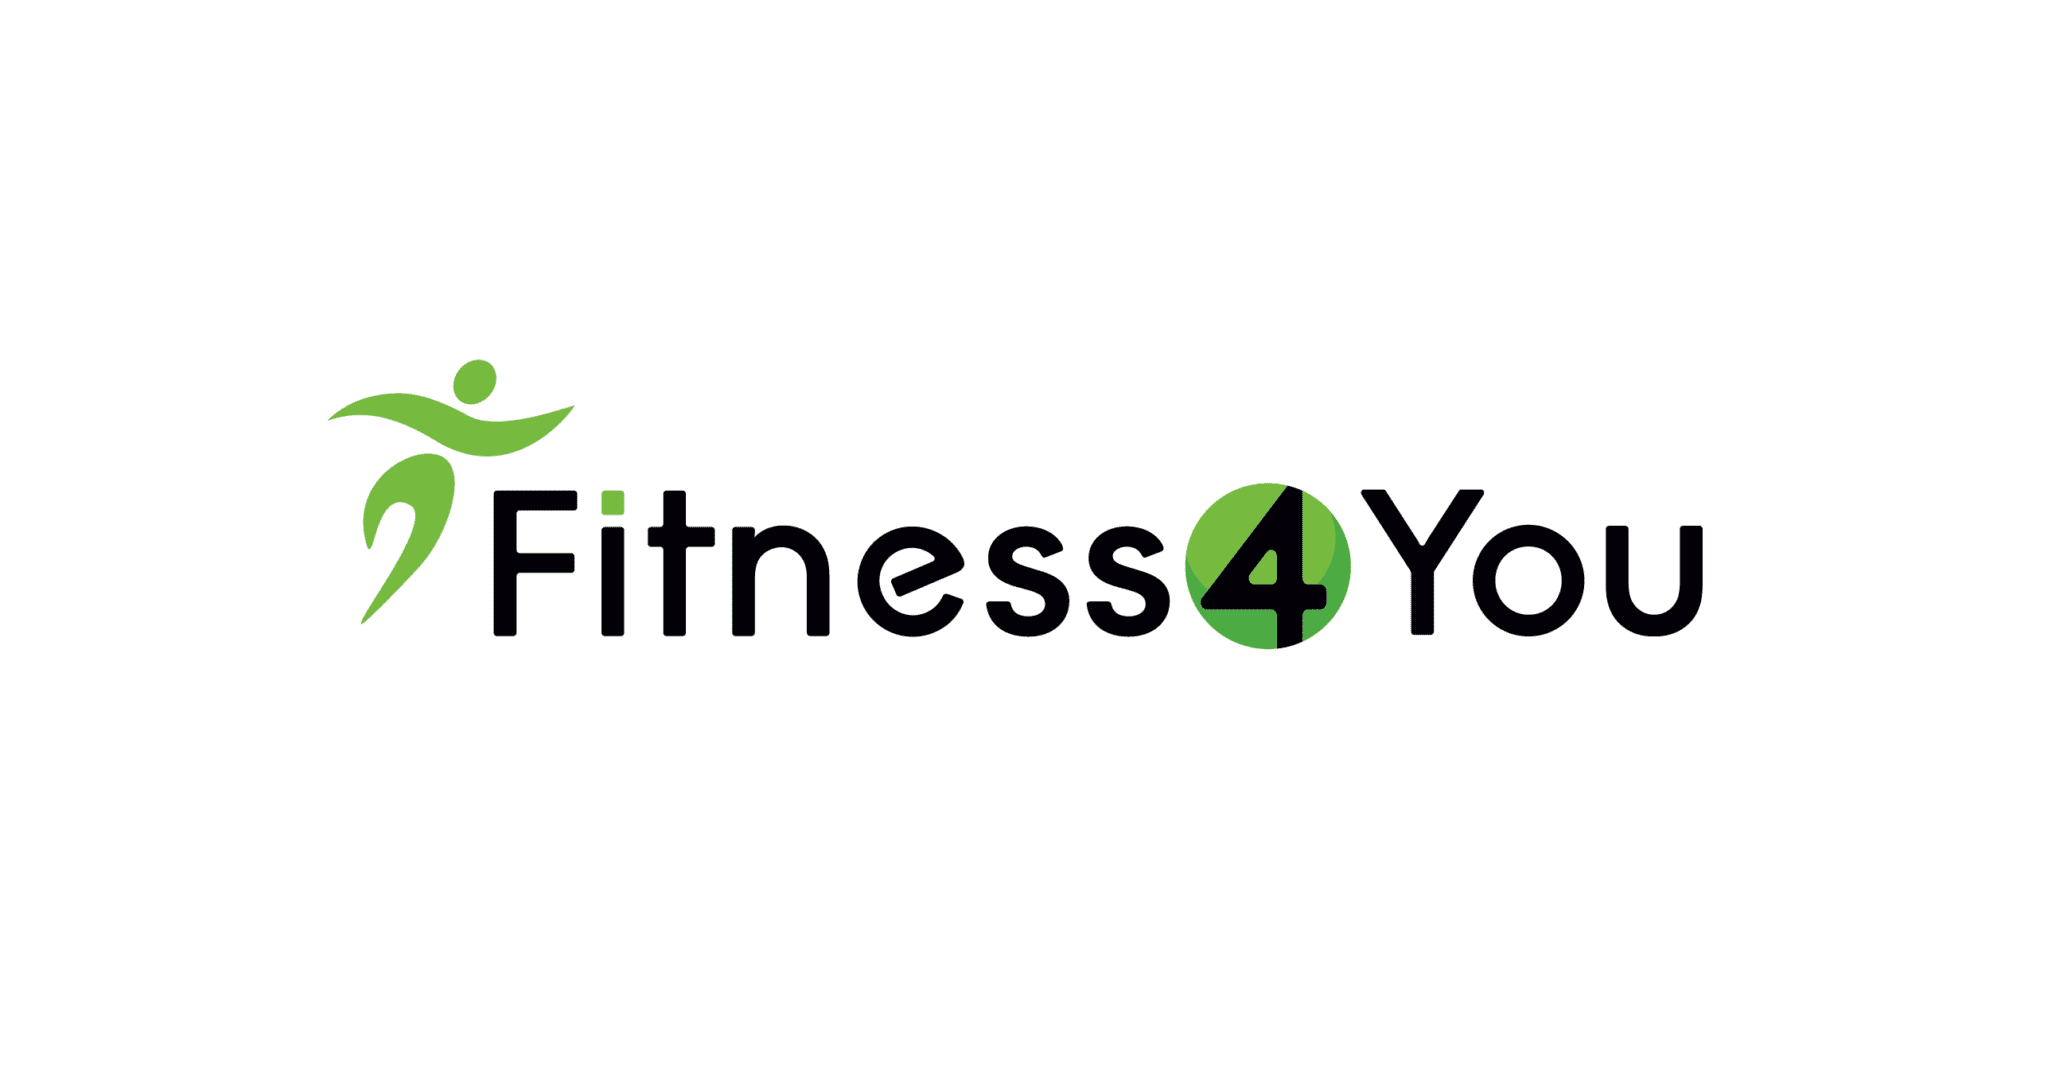 Fitness 4 you